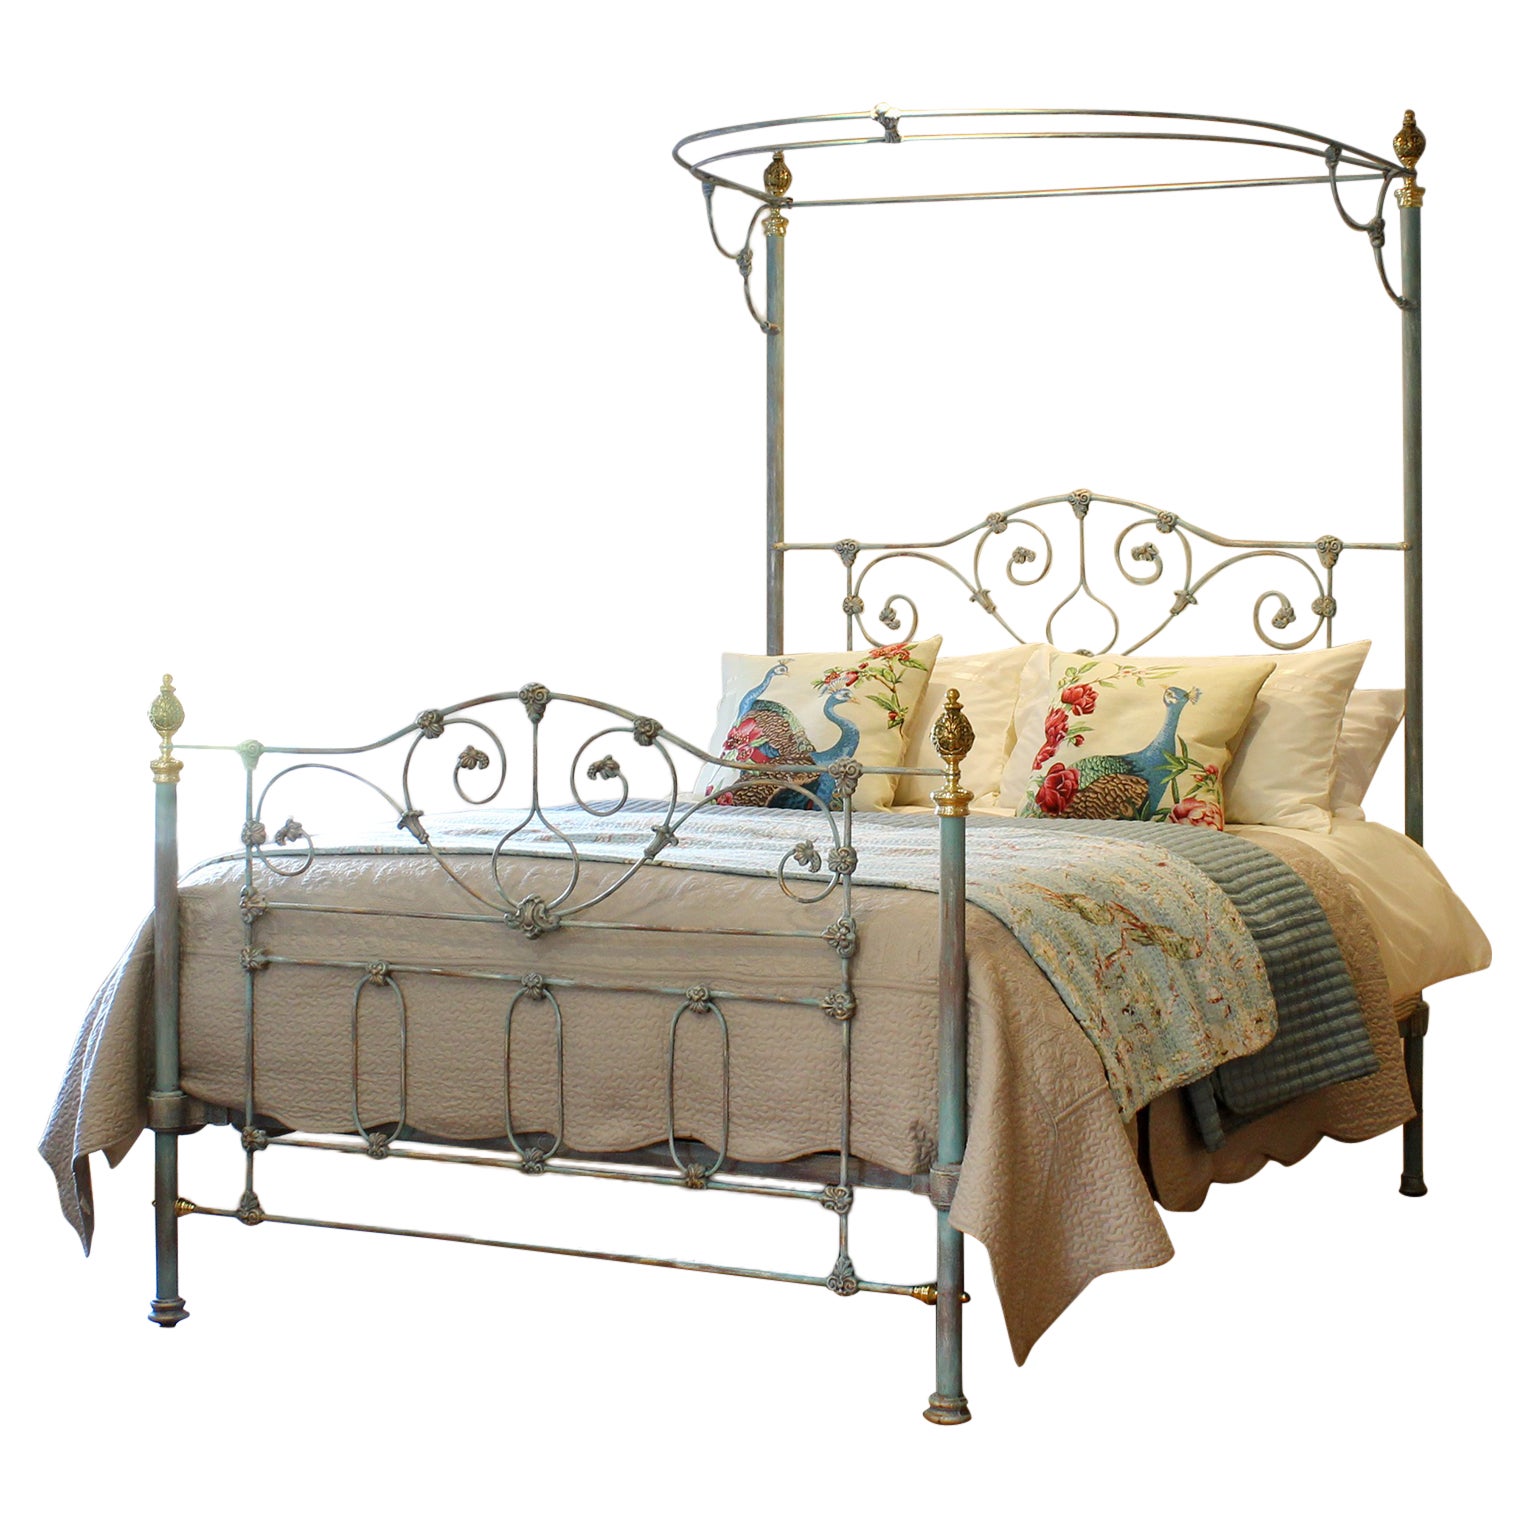 Cast Iron Half Tester Antique Bed finished in Blue Verdigris, M4P46 For Sale